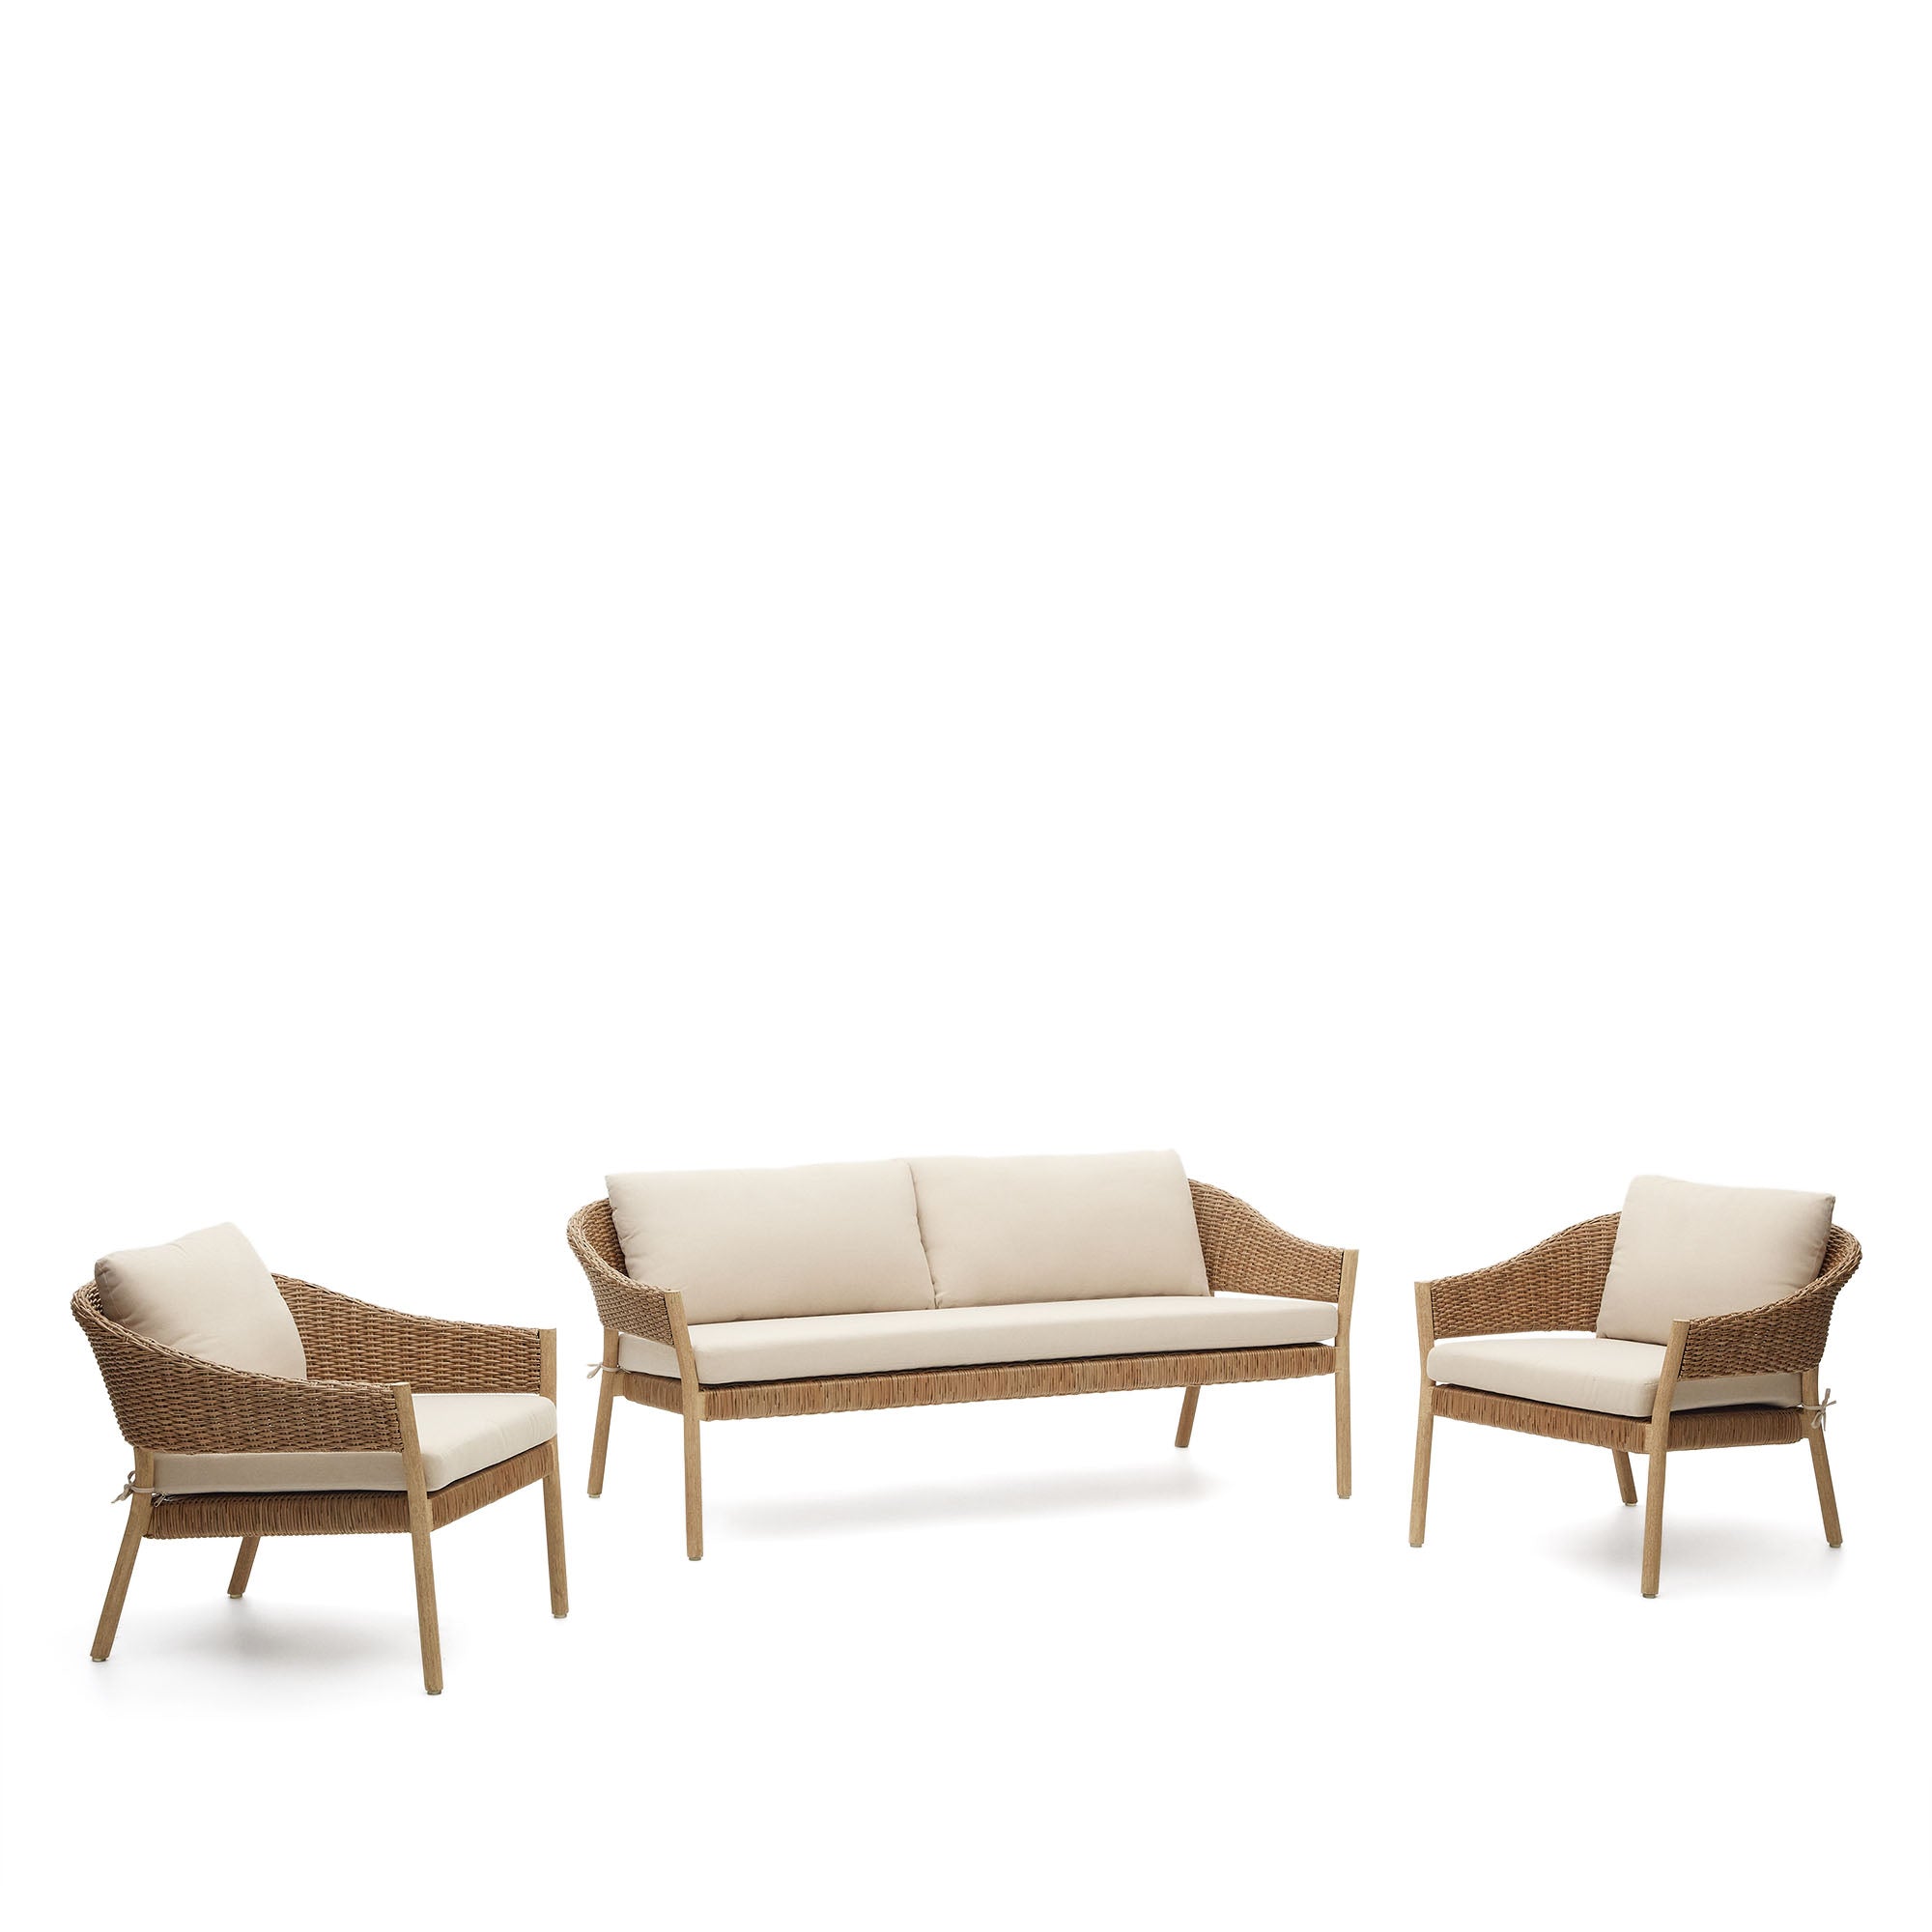 Pola stackable set, 2 seater sofa & 2 armchairs in solid eucalyptus and faux-rattan, FSC